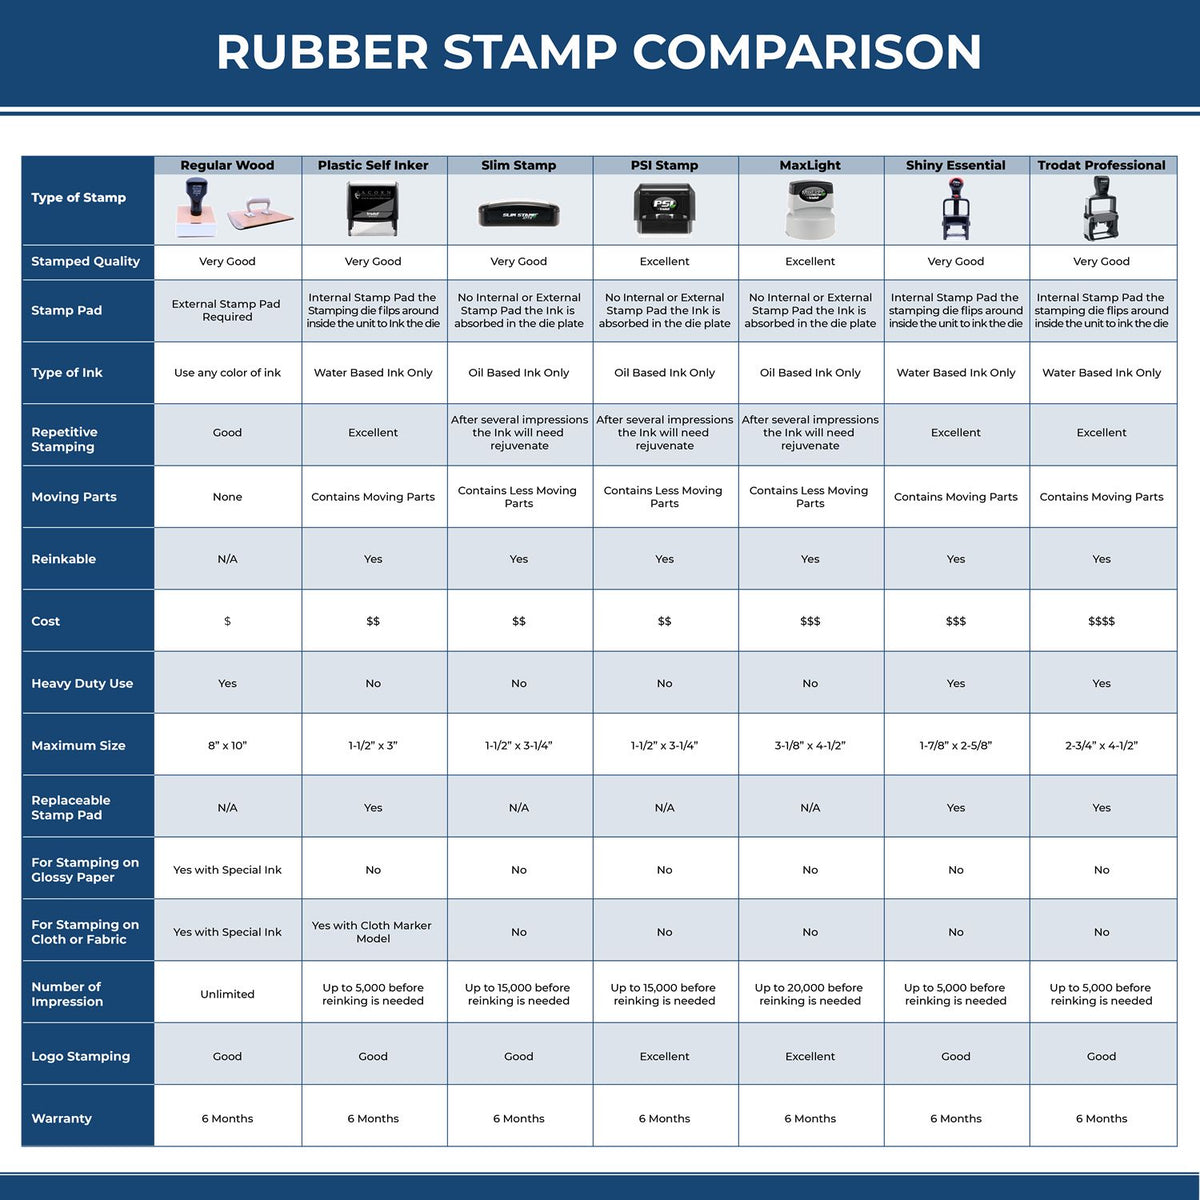 Large Lunch Money Due Rubber Stamp 4649R Rubber Stamp Comparison